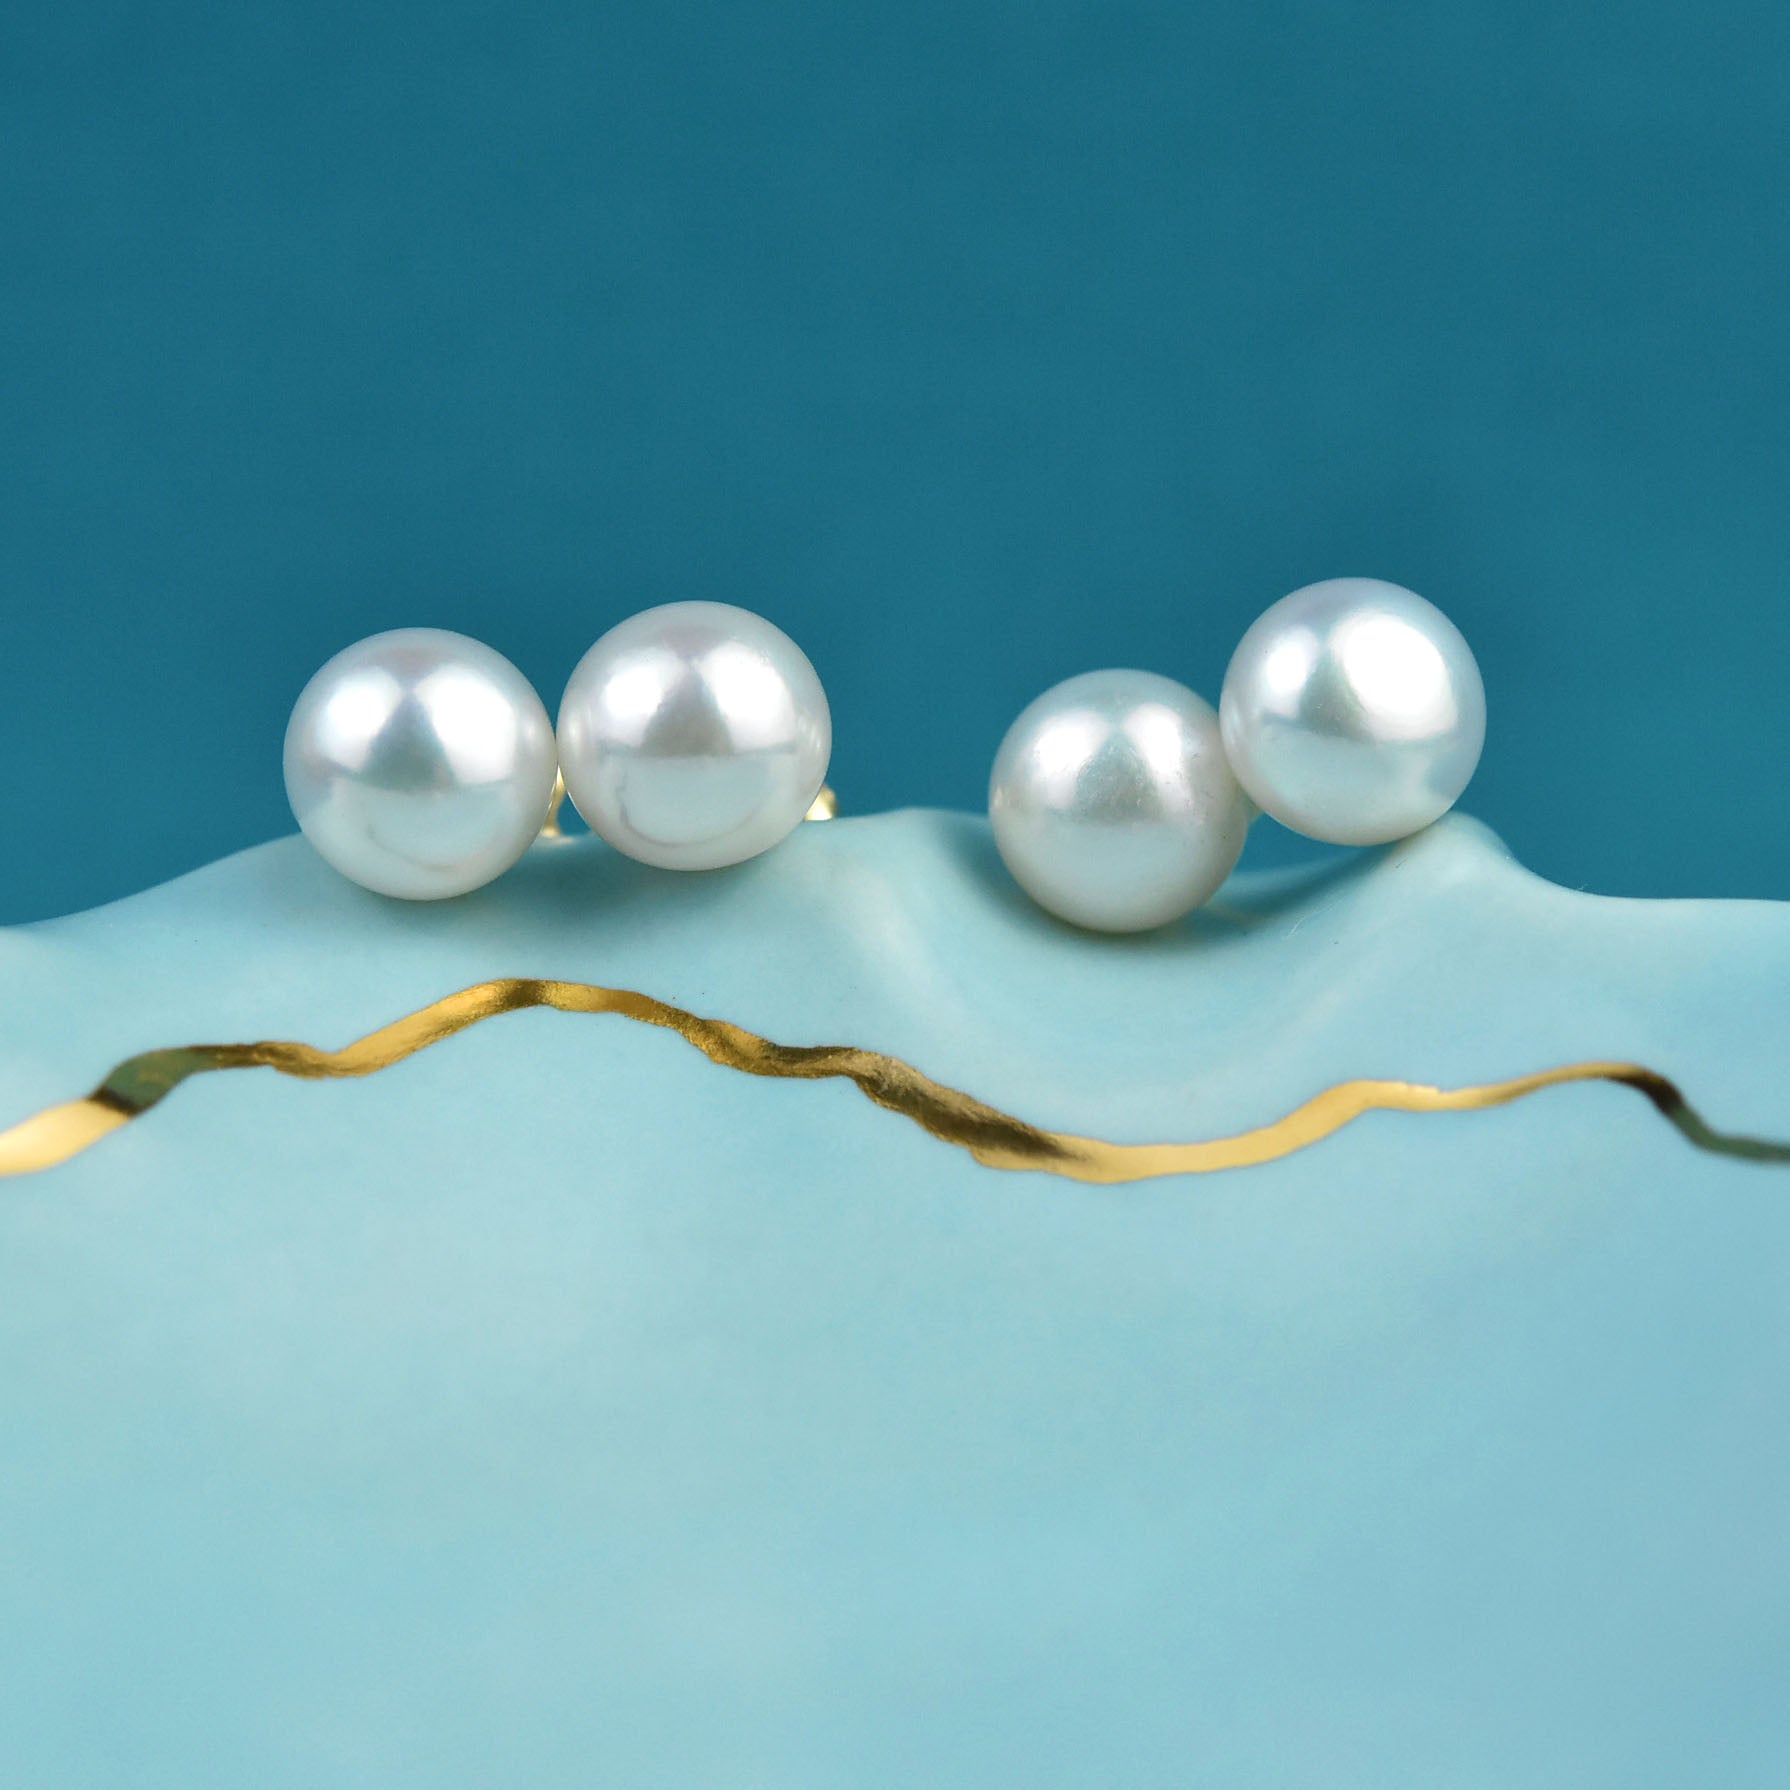 Pearls for June